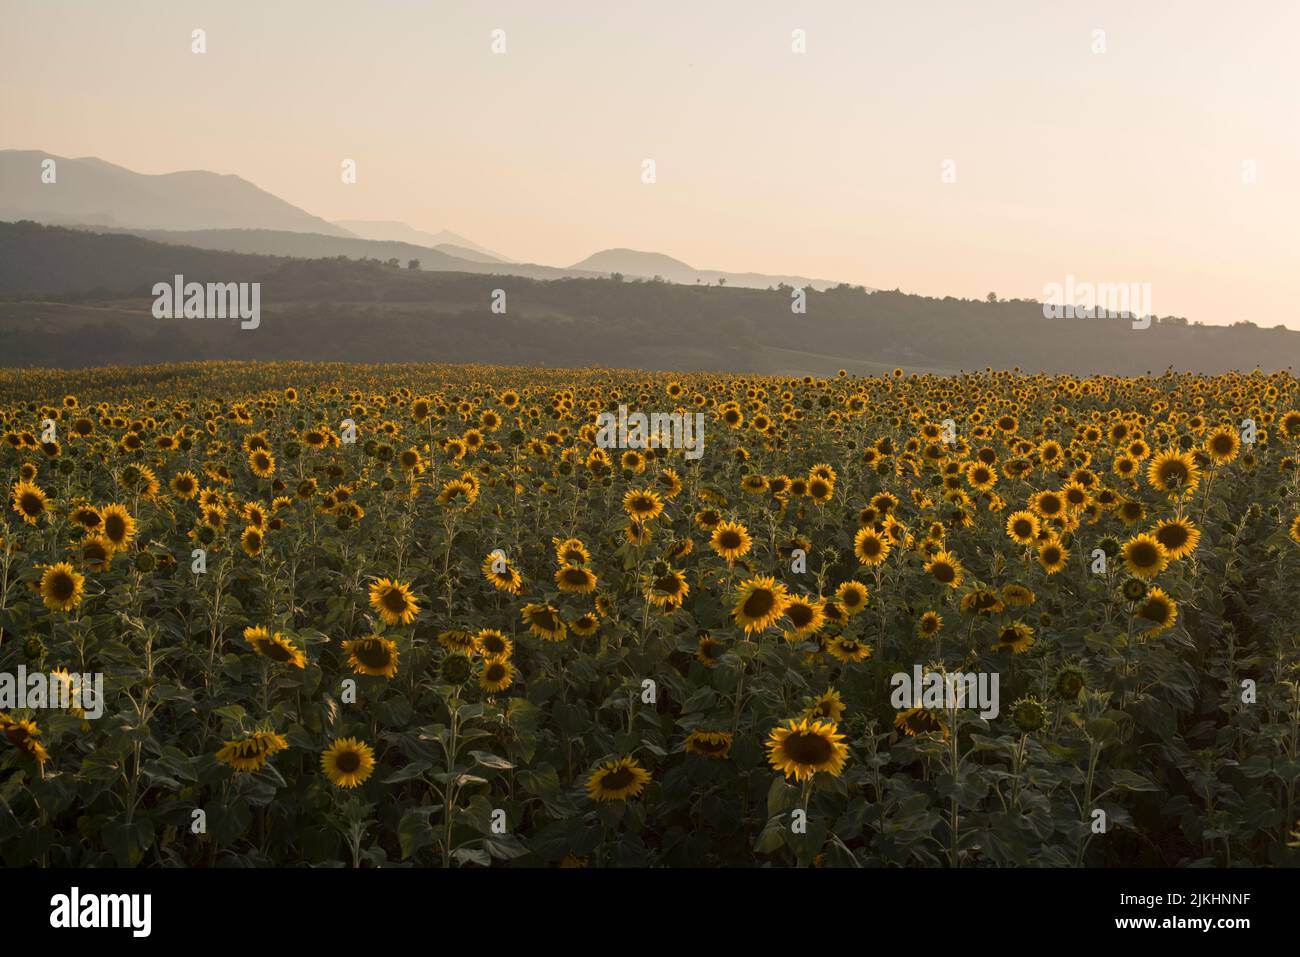 A view of sunflower field in background of forest and mountains in Artsakh Stock Photo